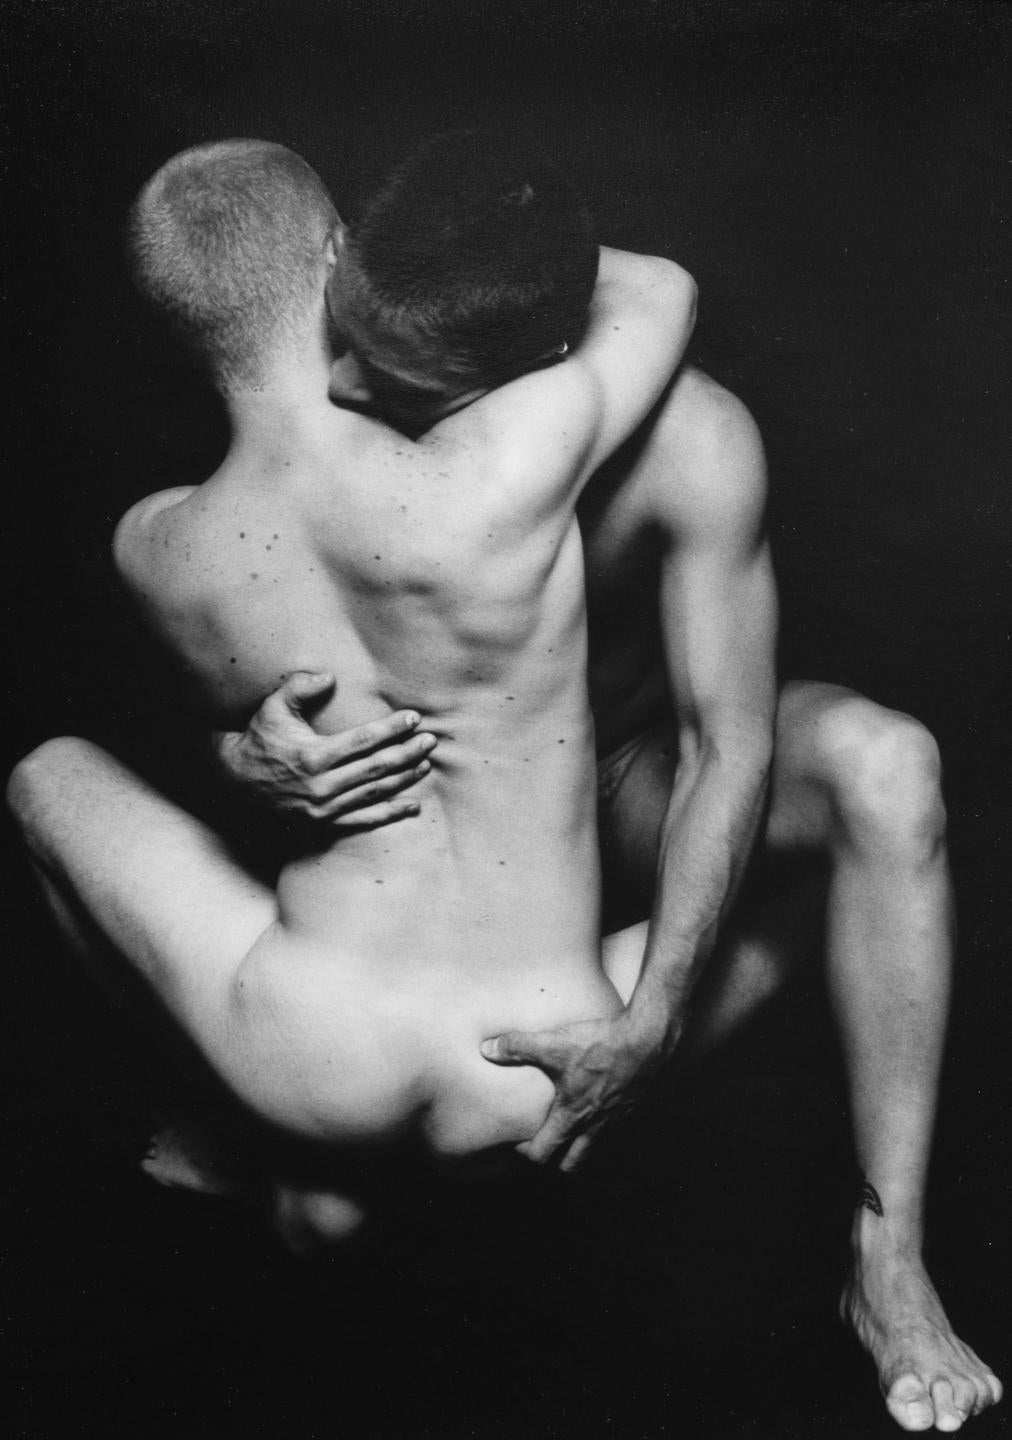 Doug Birkenheuer Nude Photograph - Untitled, Intimate Black and White Photograph of Two Male Nudes Embracing